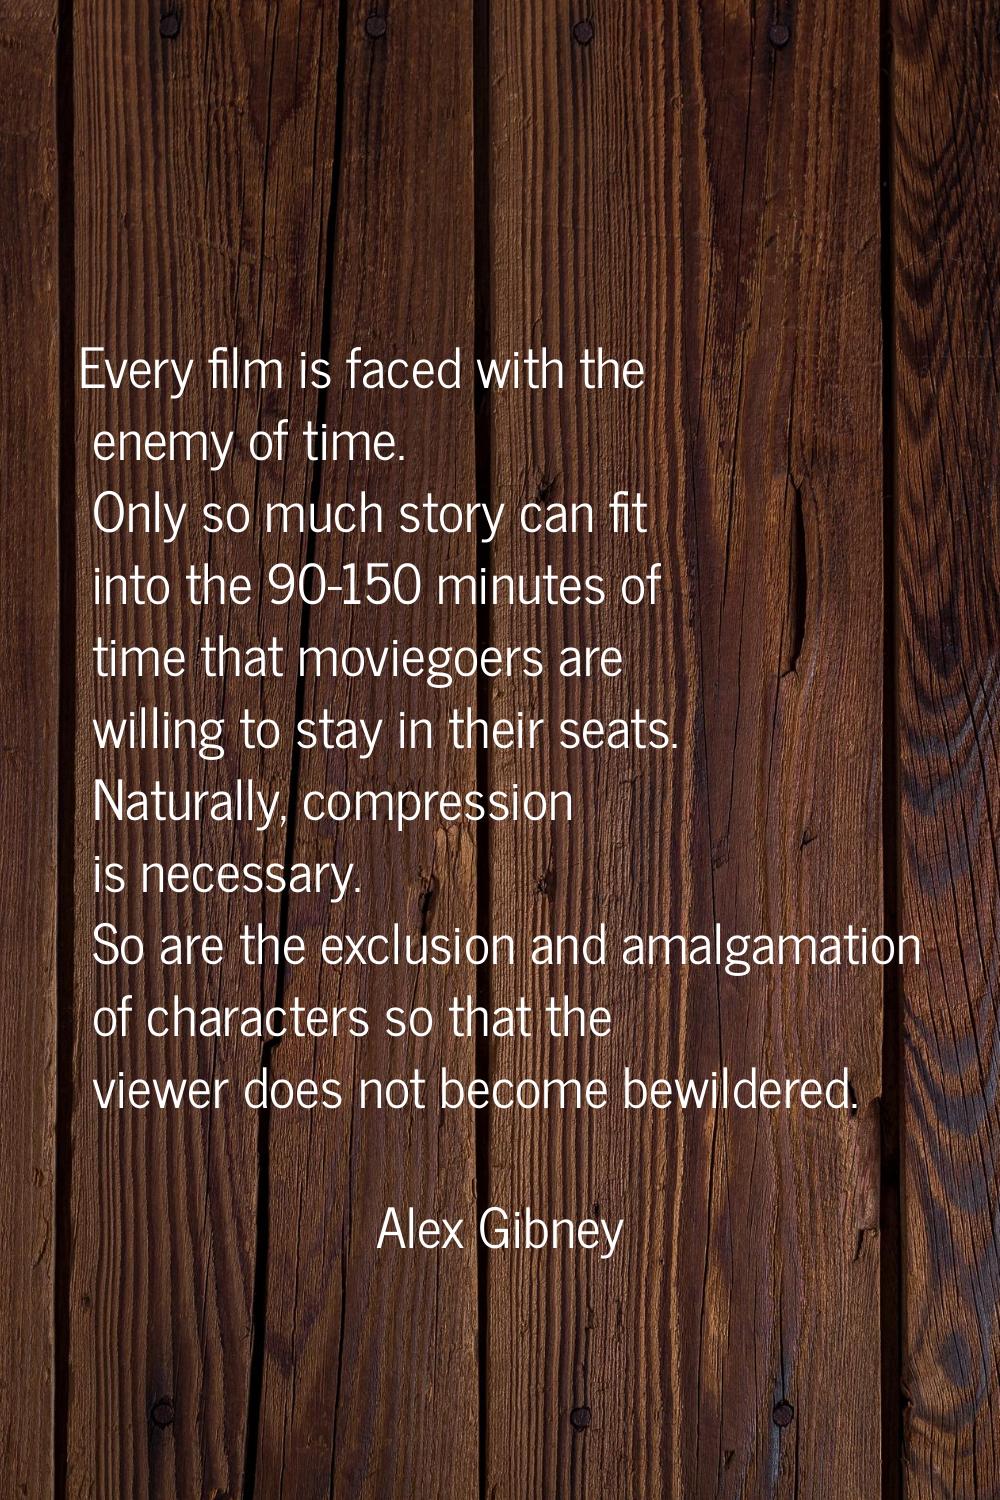 Every film is faced with the enemy of time. Only so much story can fit into the 90-150 minutes of t